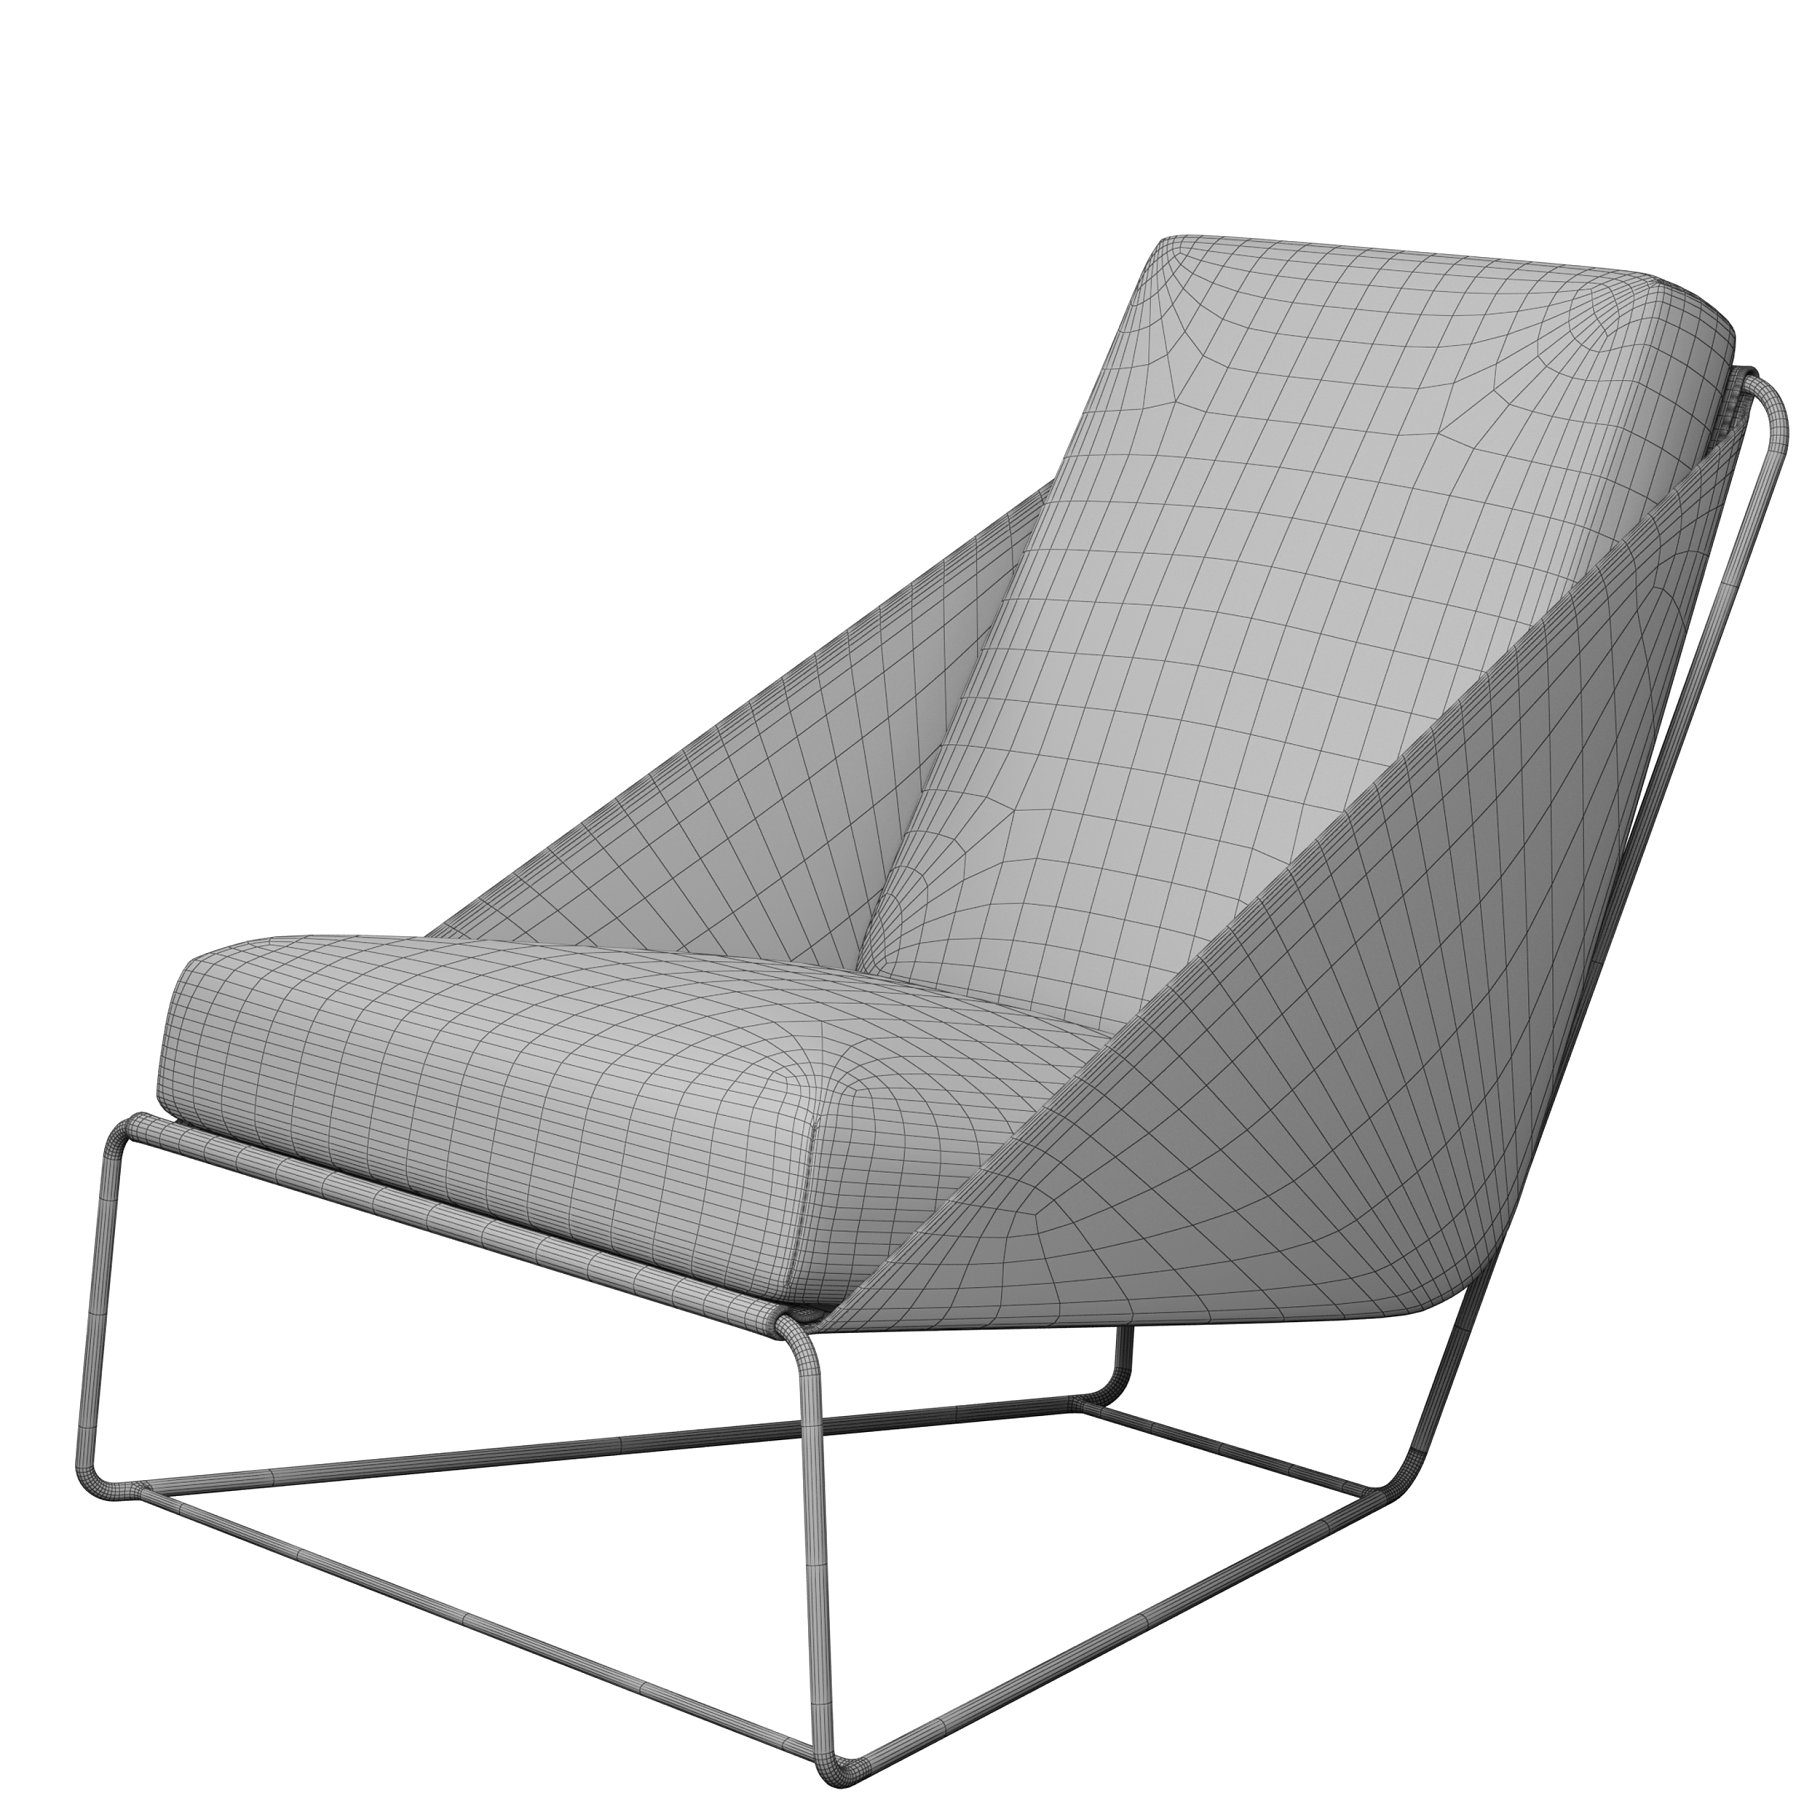 Rendering of a wonderful 3d model of a chair without textures